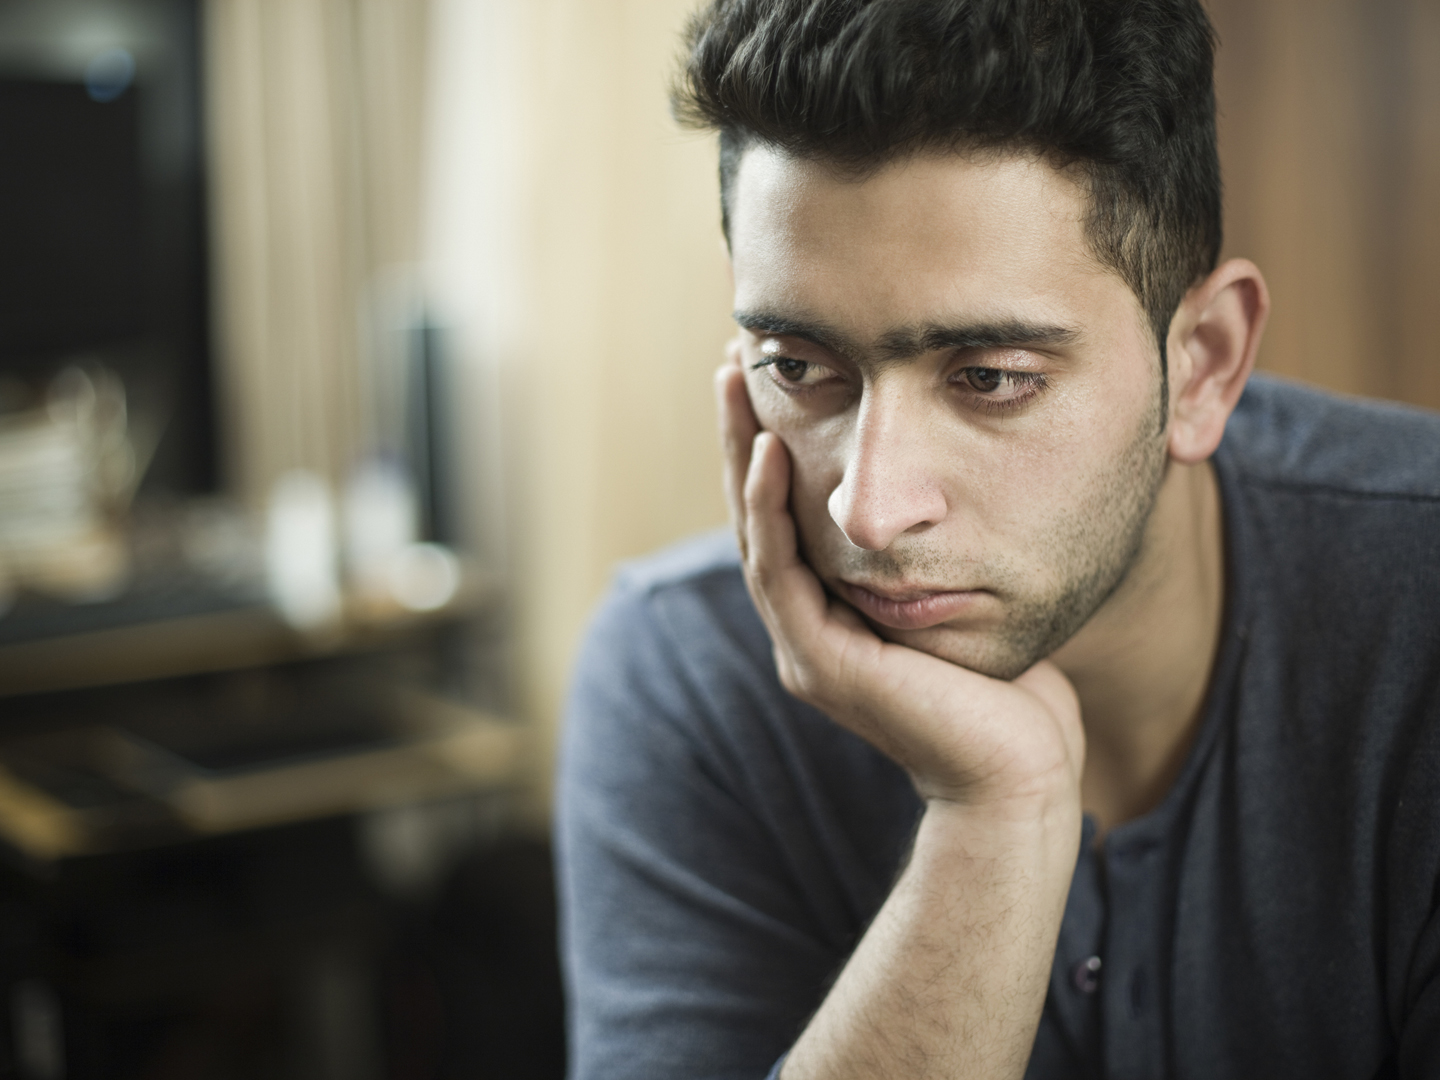 Indoor low key image of a serene young man thinking by resting his head on hand and looking away with and blank expression. He is wearing a t-shirt. One person, waist up, horizontal composition with selective focus and copy space.